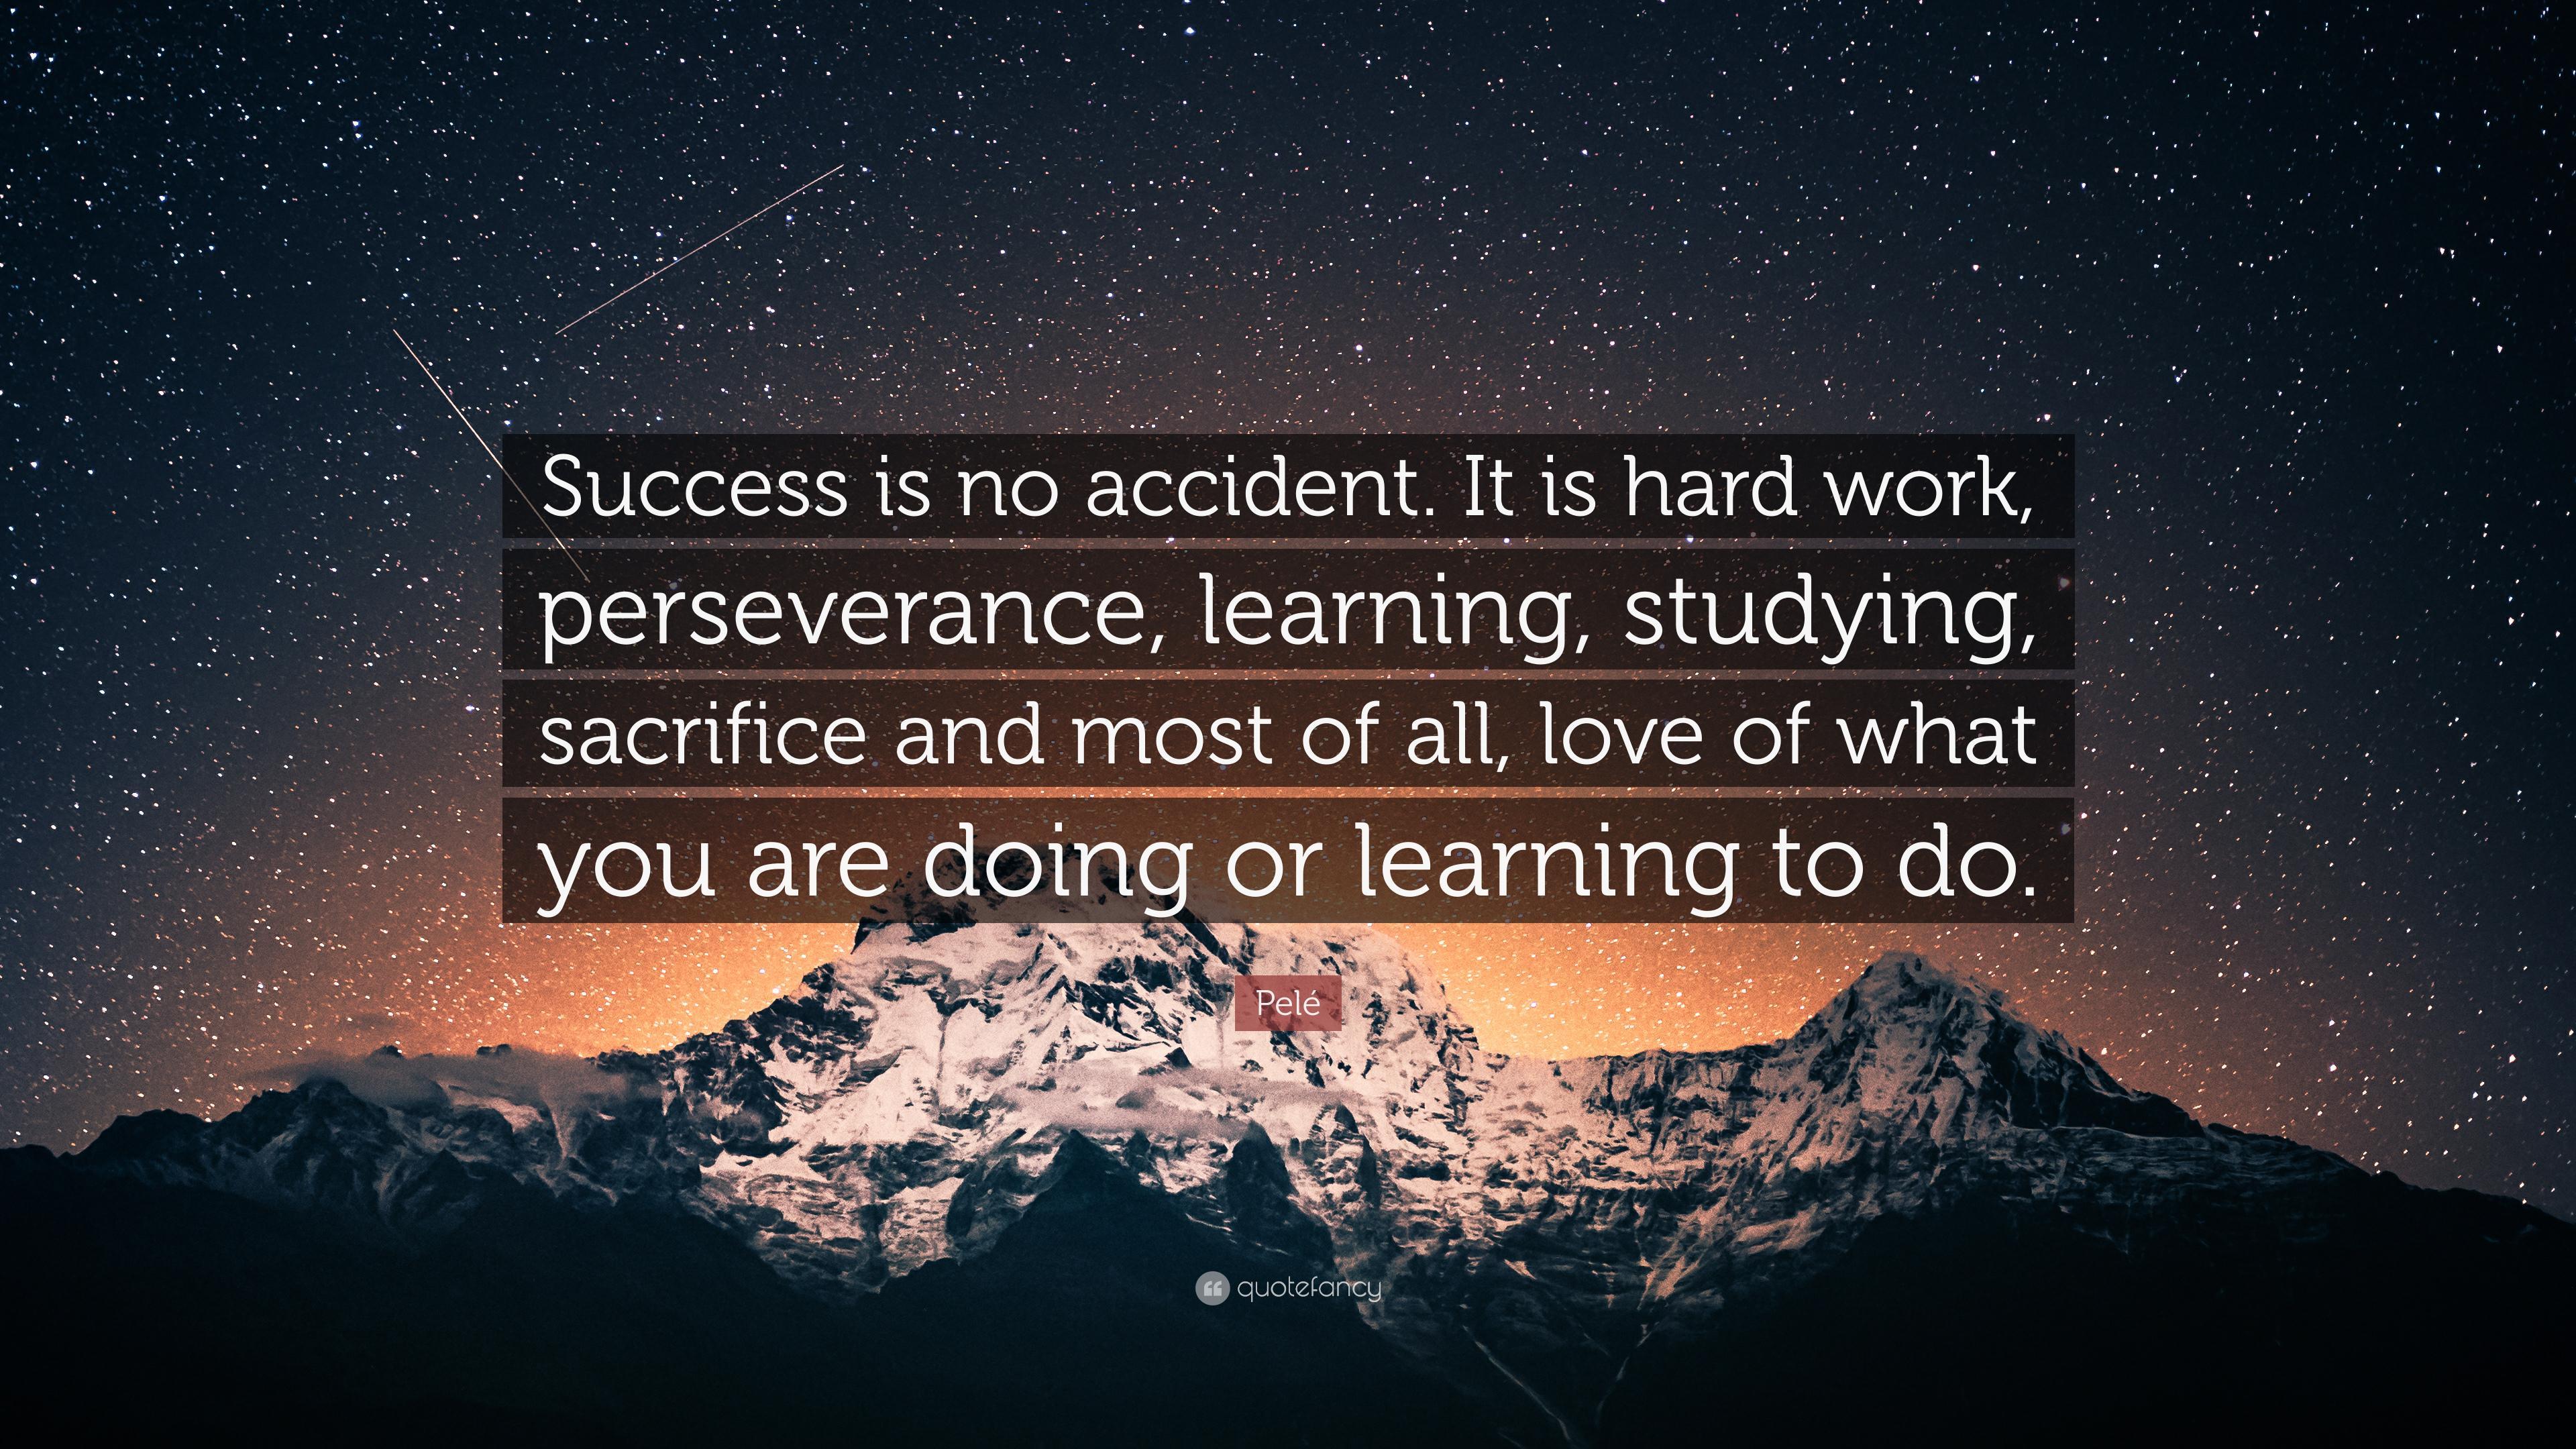 Pelé Quote: “Success is no accident. It is hard work, perseverance